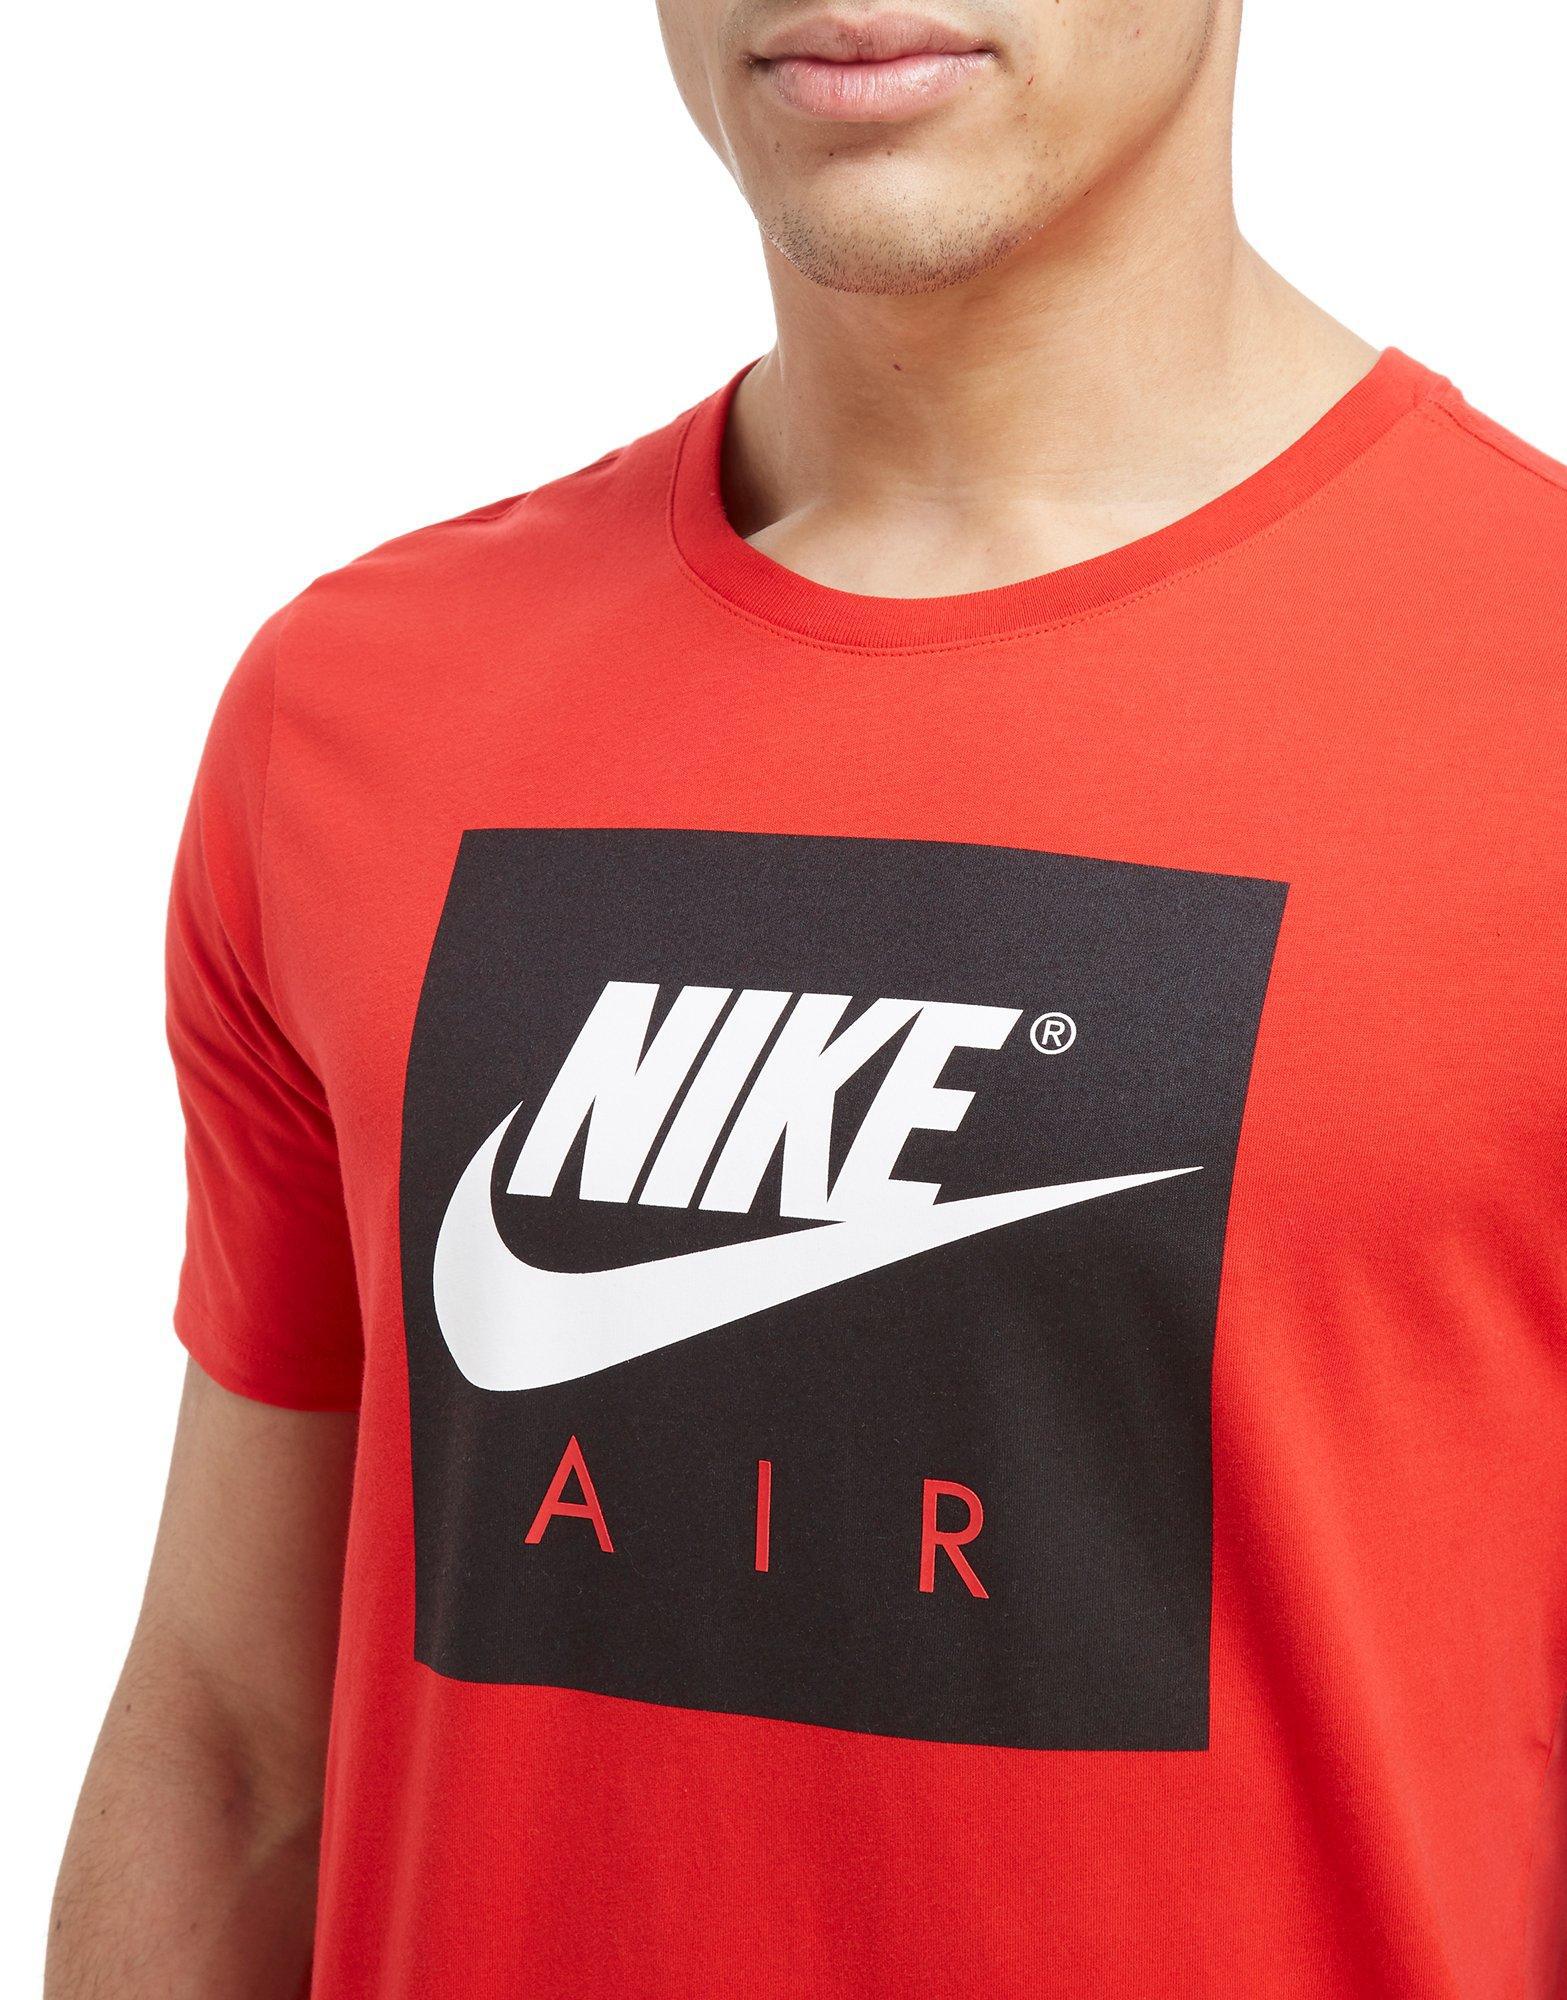 red and black shirt nike